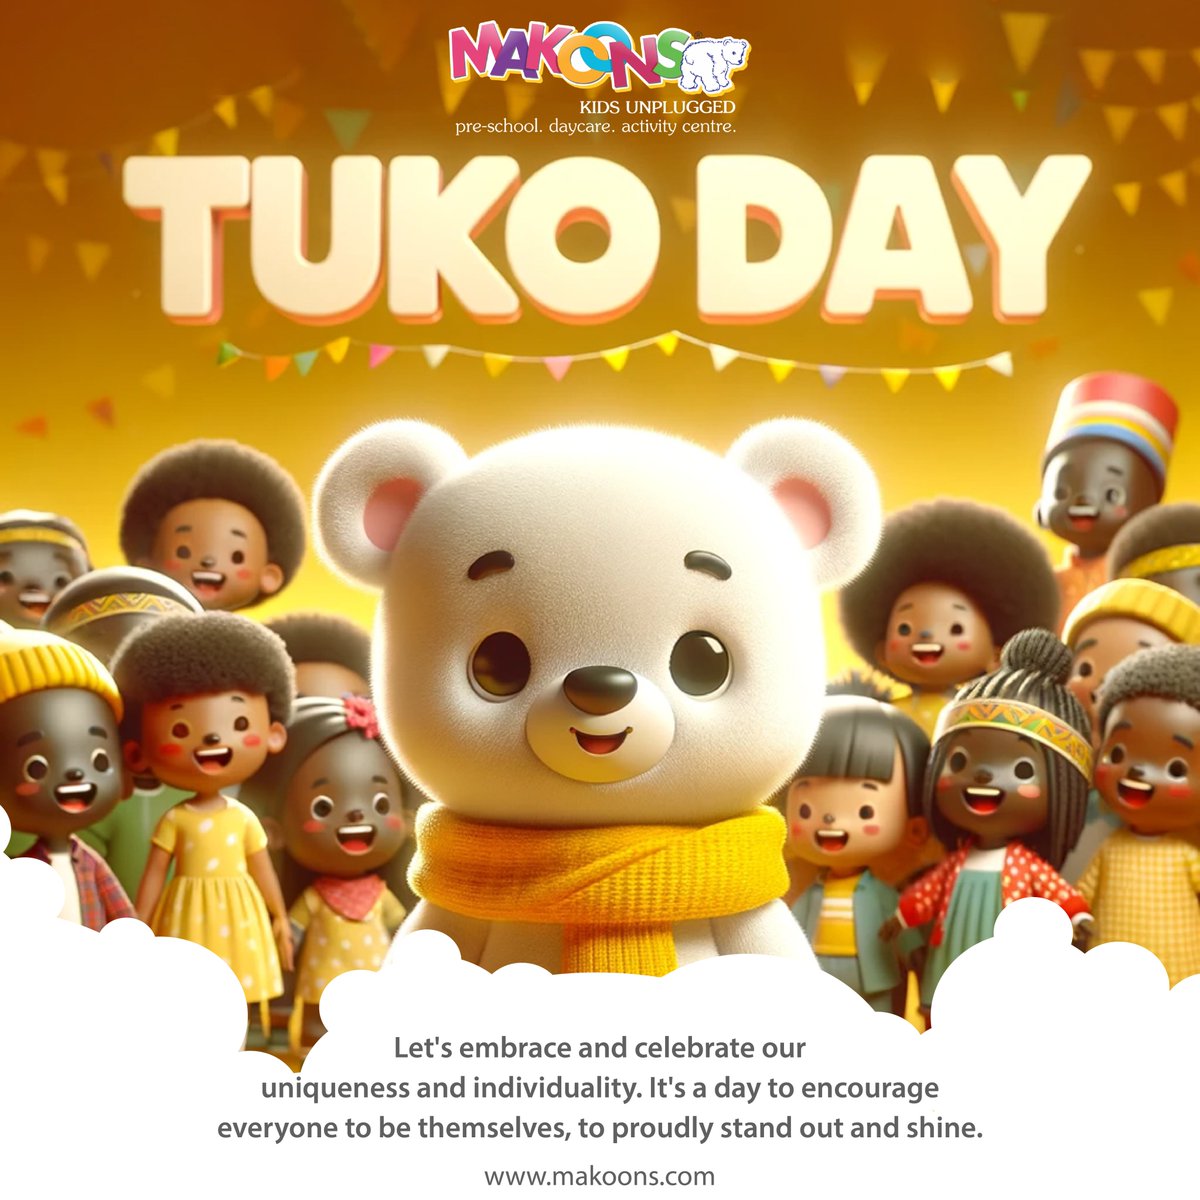 Let's be proud of what makes us special on TUKO Day – where being ourselves is the coolest thing ever!❤️
#TUKODay #BeYourself #CelebratingUniqueness #FunTimes #KidsJoy #SpecialAndProud #UniqueParty #ColorfulMe #MakoonsPlaySchool